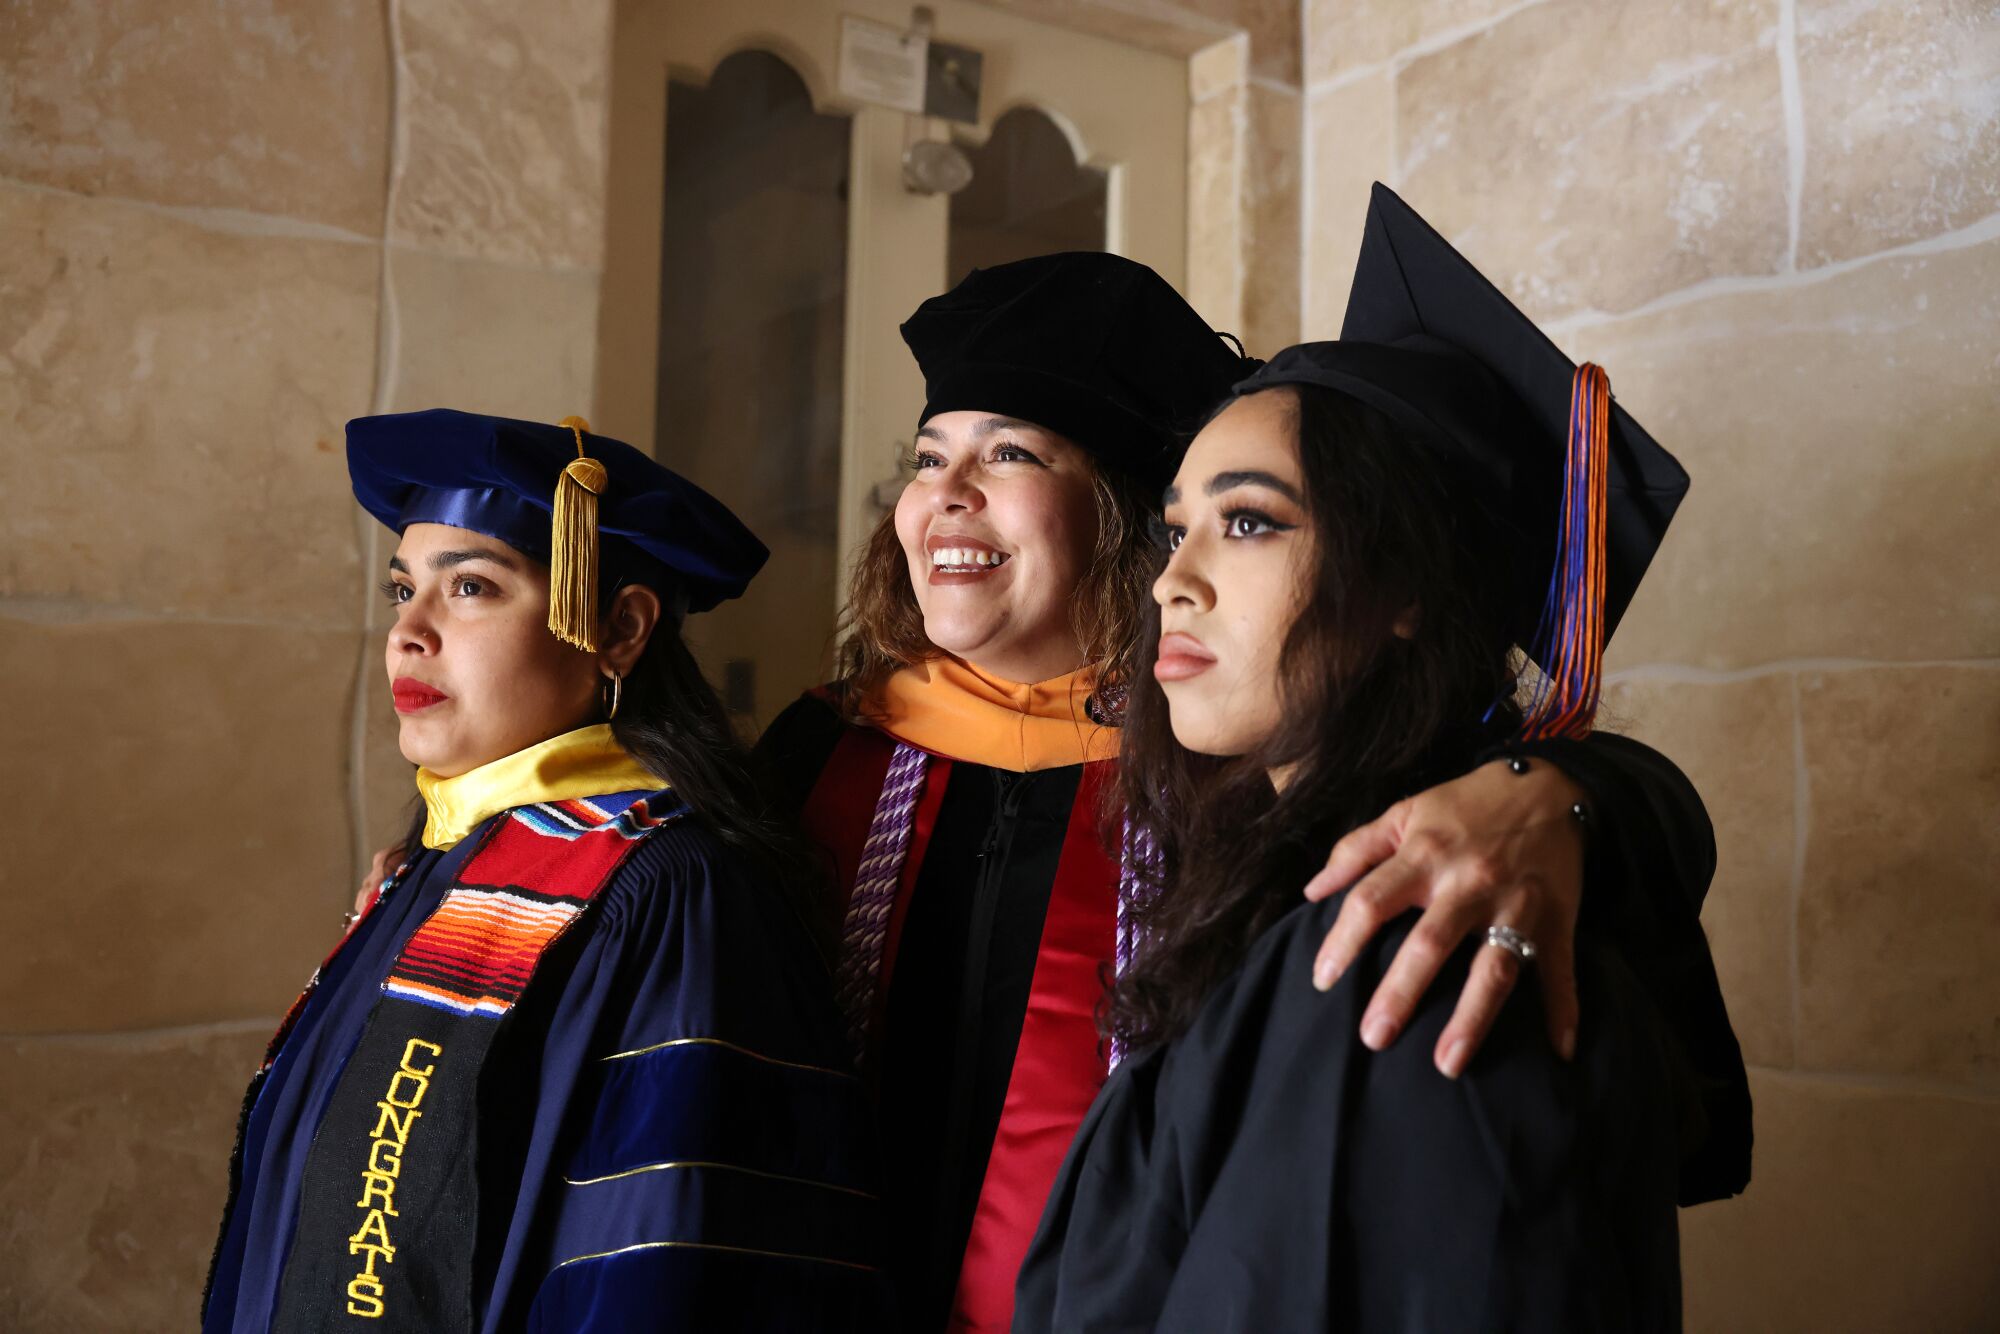 Cindy, Cecilia and Abigail Escobedo pose for photos in their caps and gowns.